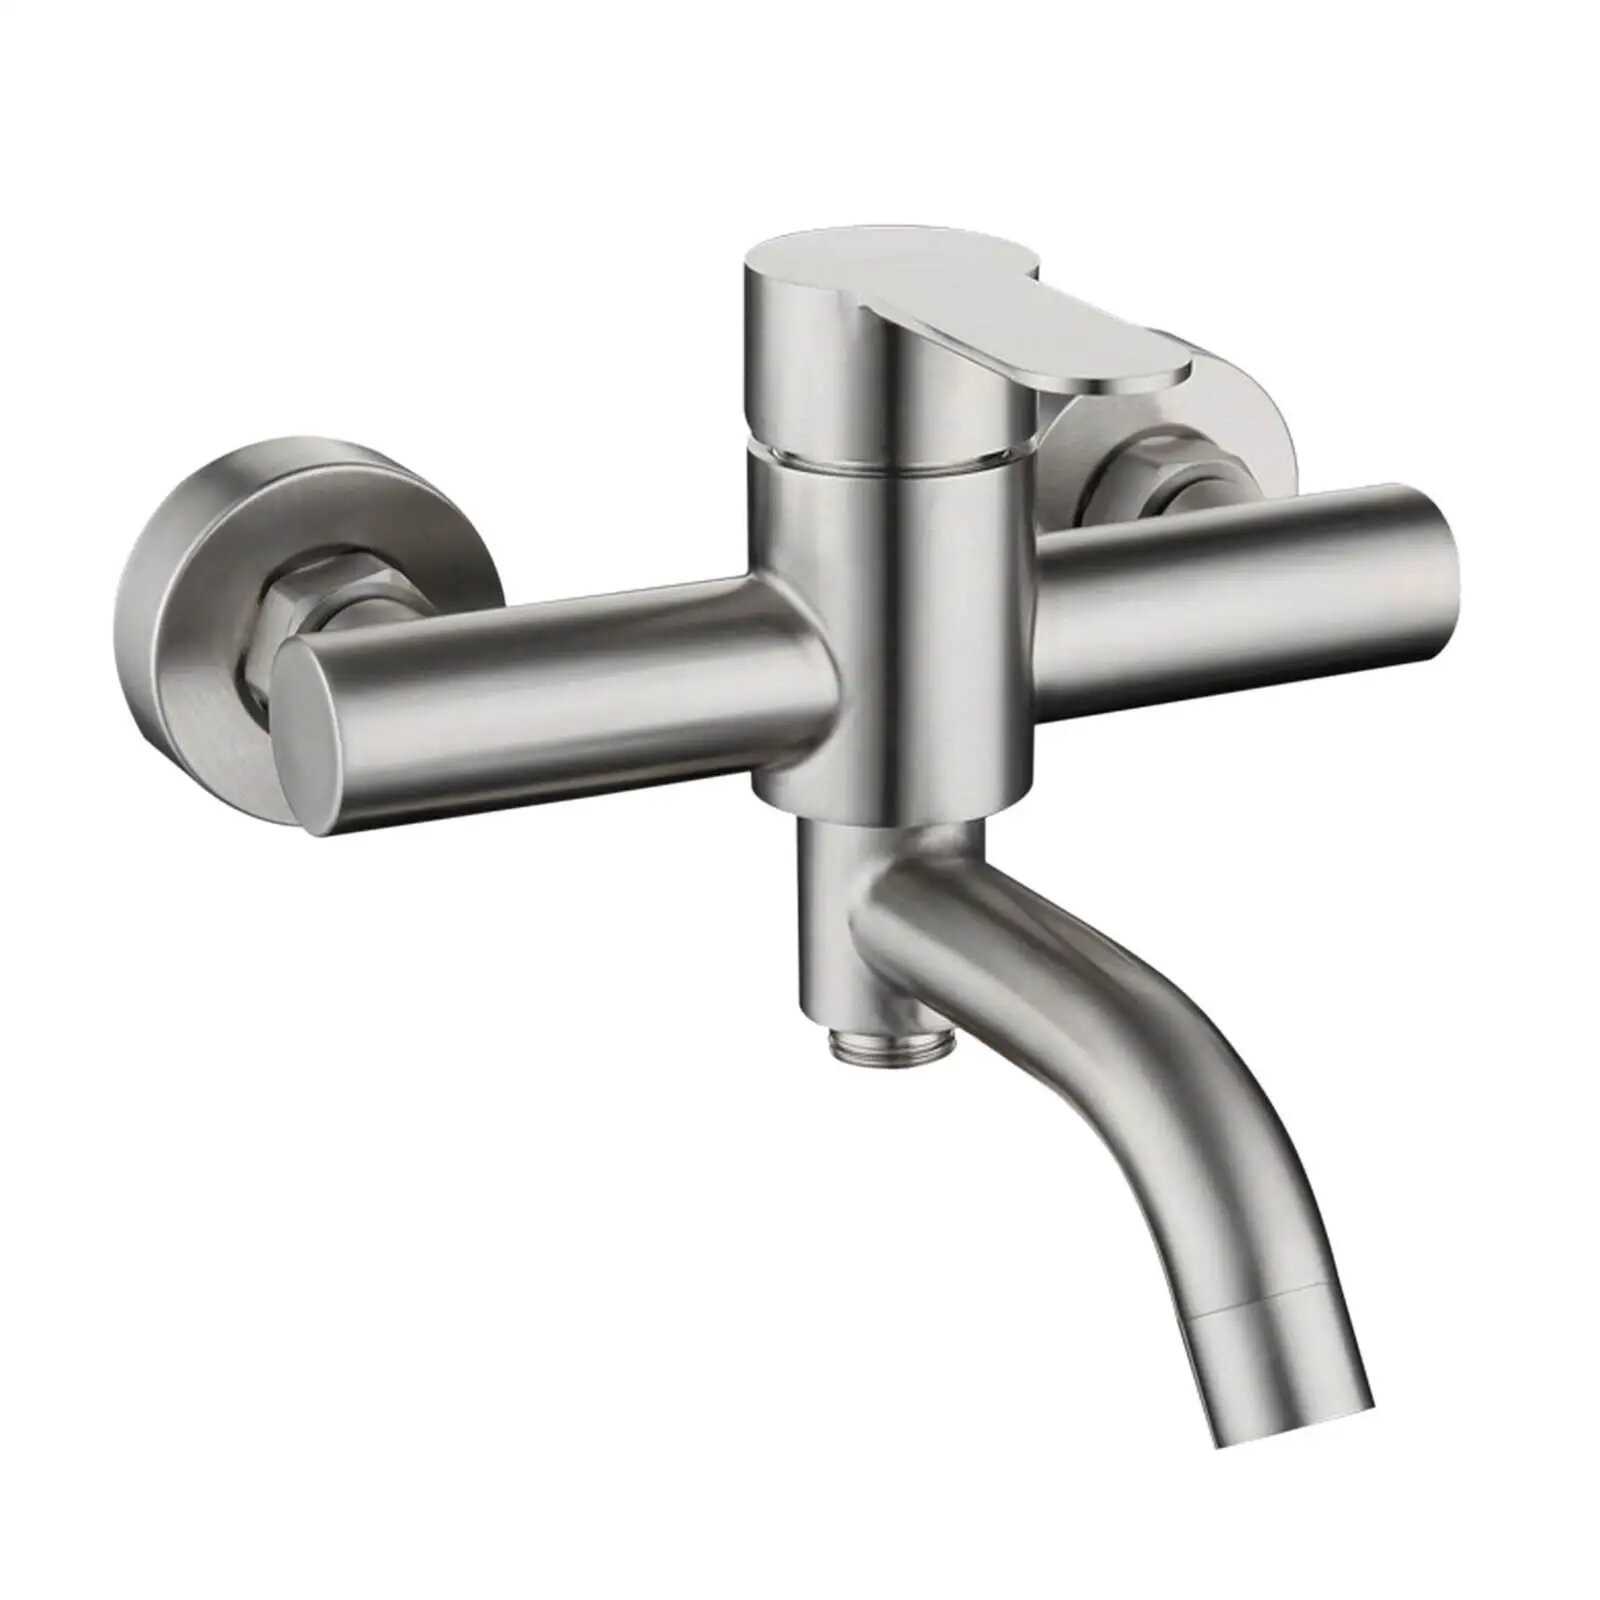 

Stainless Steel G1/2 Hot and Cold Shower Mixer Faucet Shower Diverter Wall Mounted Bathroom Fixtures Ceramic Valve Core